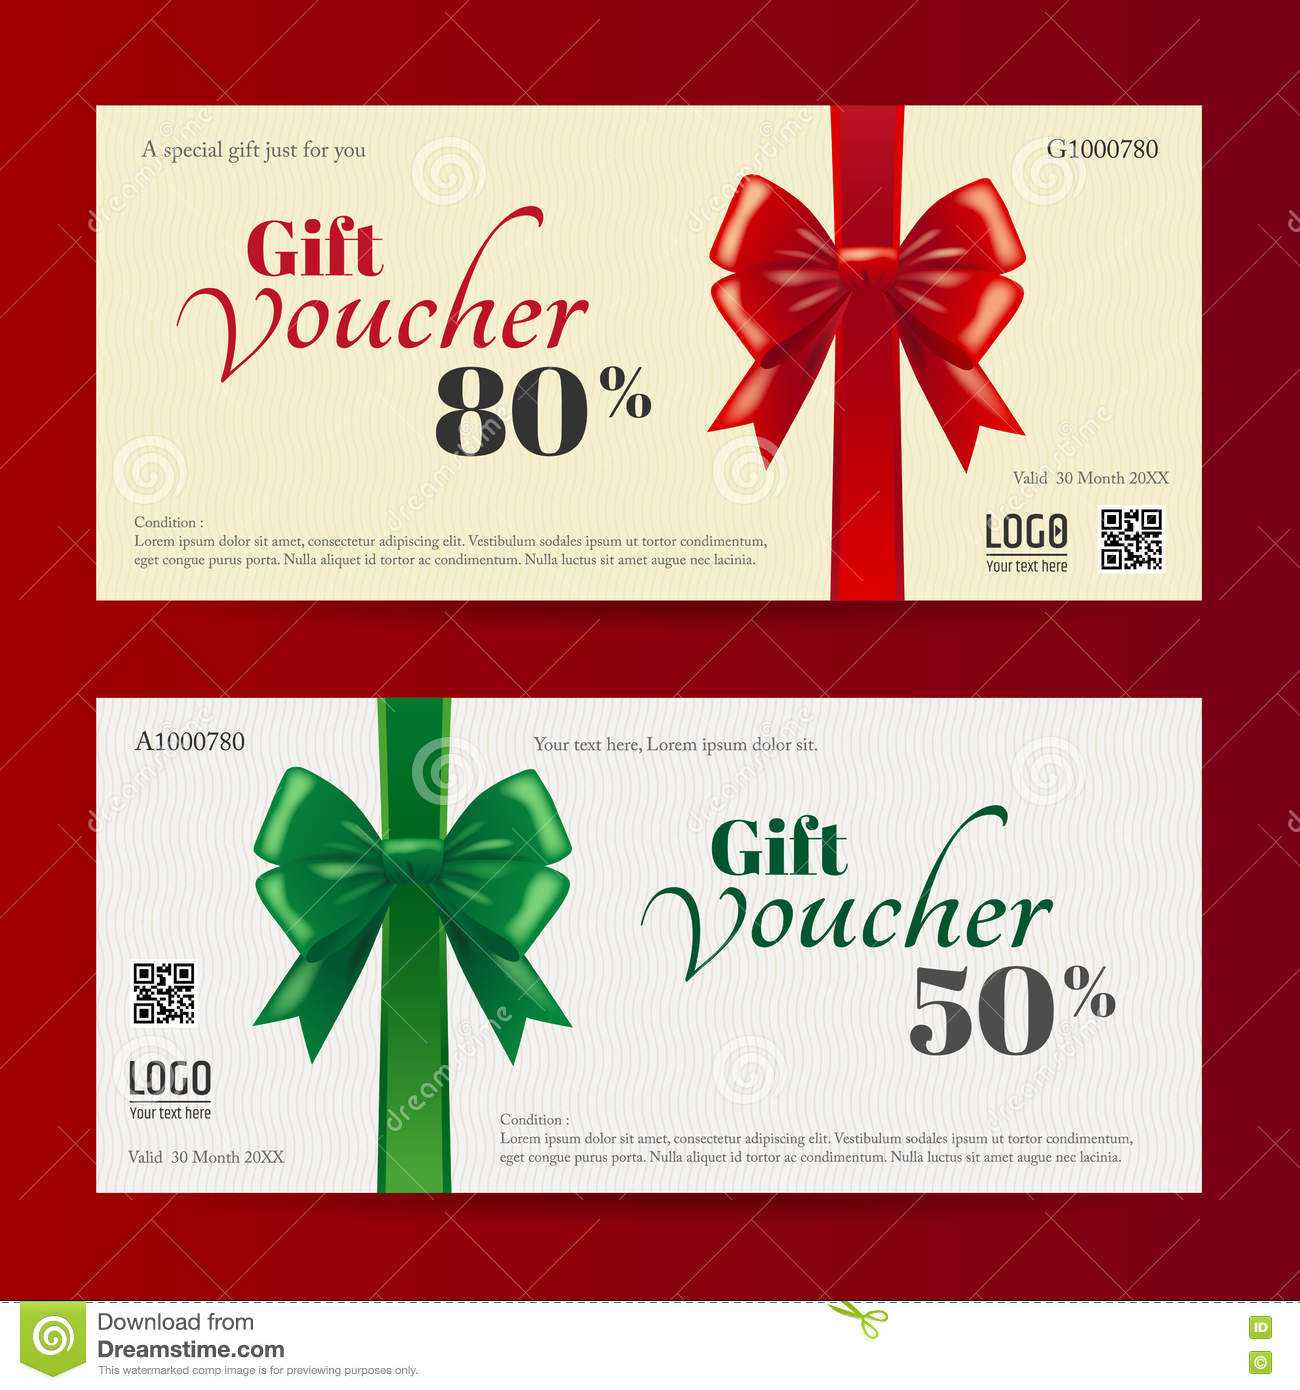 Elegant Christmas Gift Card Or Gift Voucher Template Stock Pertaining To Christmas Gift Certificate Template Free Download